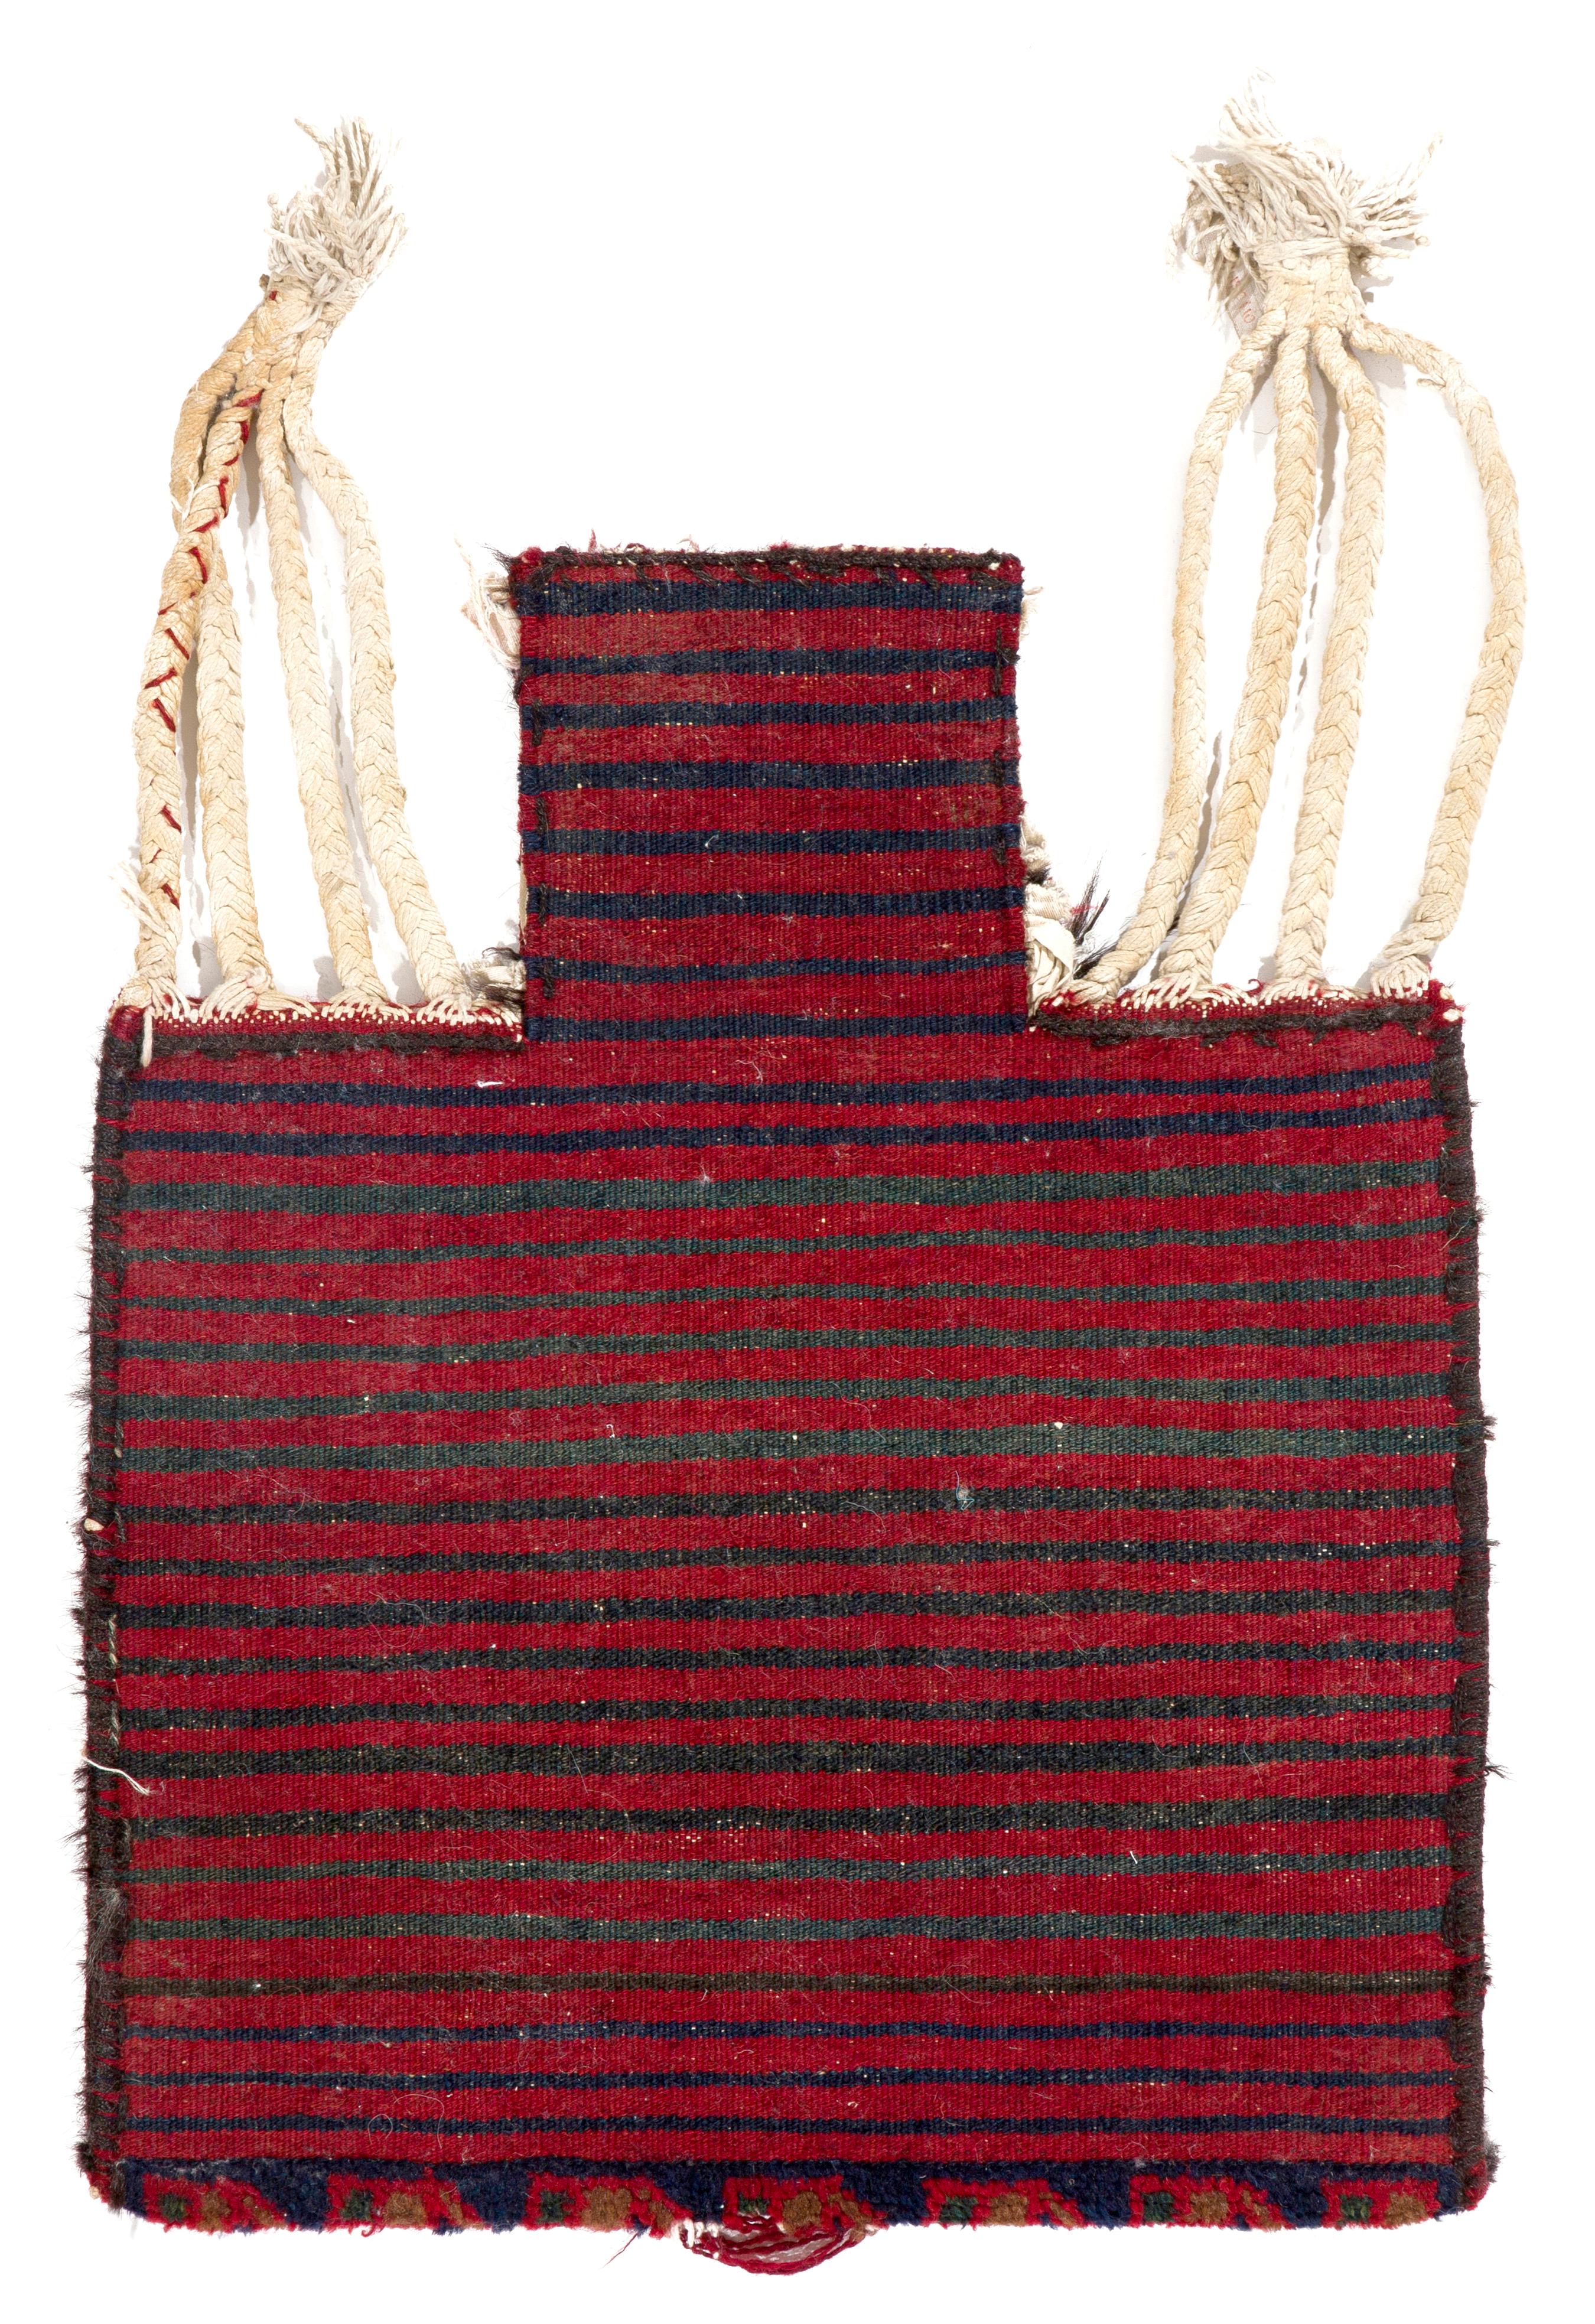 A vintage Turkish salt bag is a traditional textile item that was historically used to transport and store salt in Turkey. These bags are typically made from coarse, durable fabrics such as burlap or canvas, and are decorated with colorful geometric